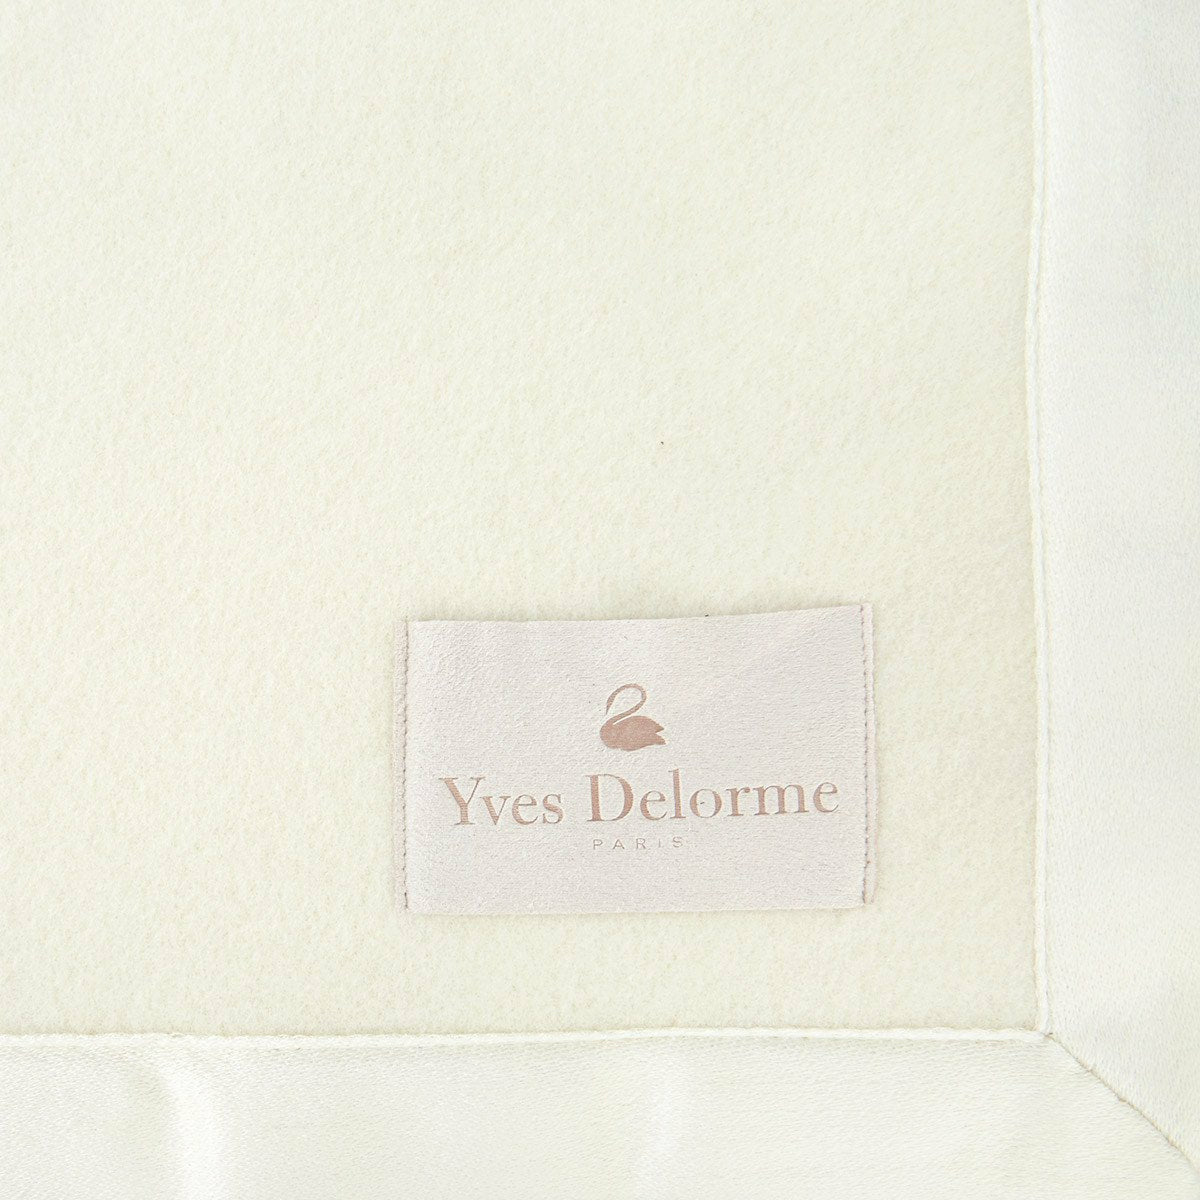 Yves Delorme Nymphe Blanket Swatch Nacre Fine Linens